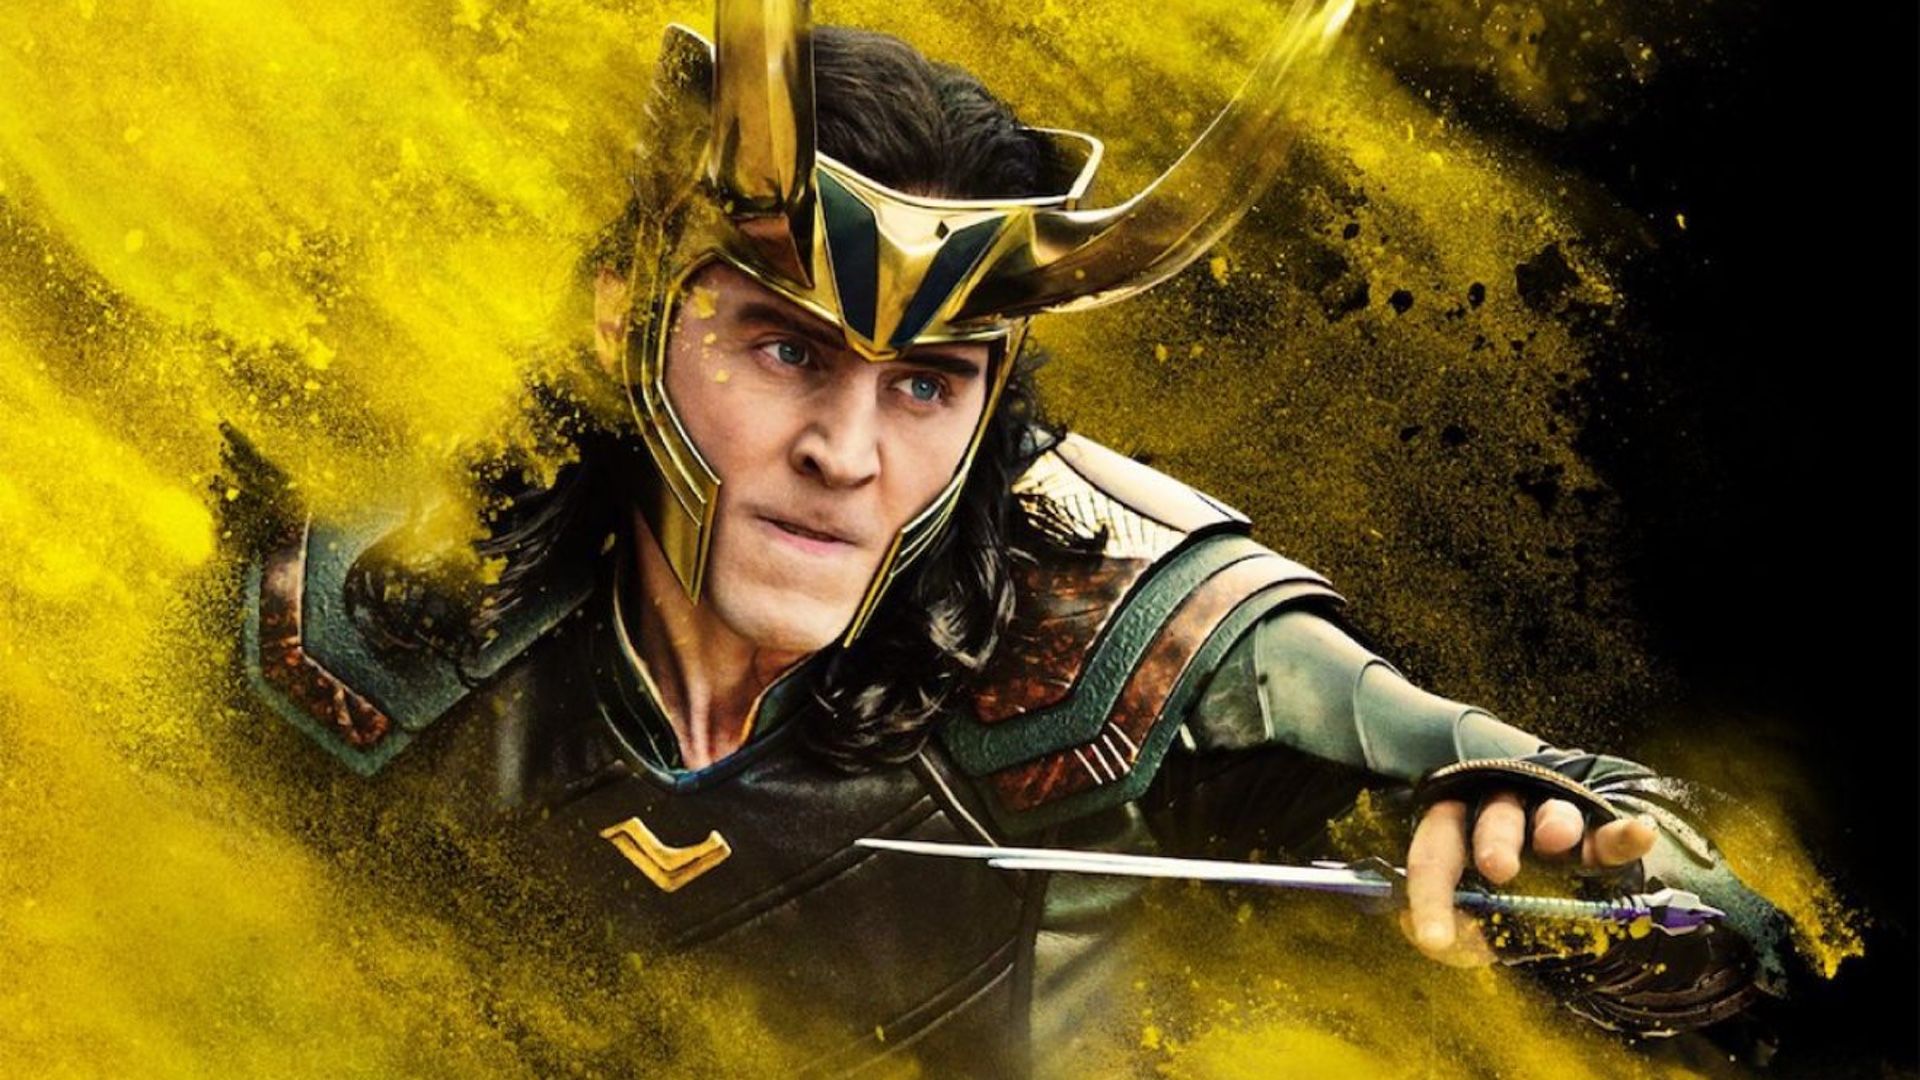 Loki Will “Struggle” With His Identity In The New Disney+ Series. What's On Disney Plus